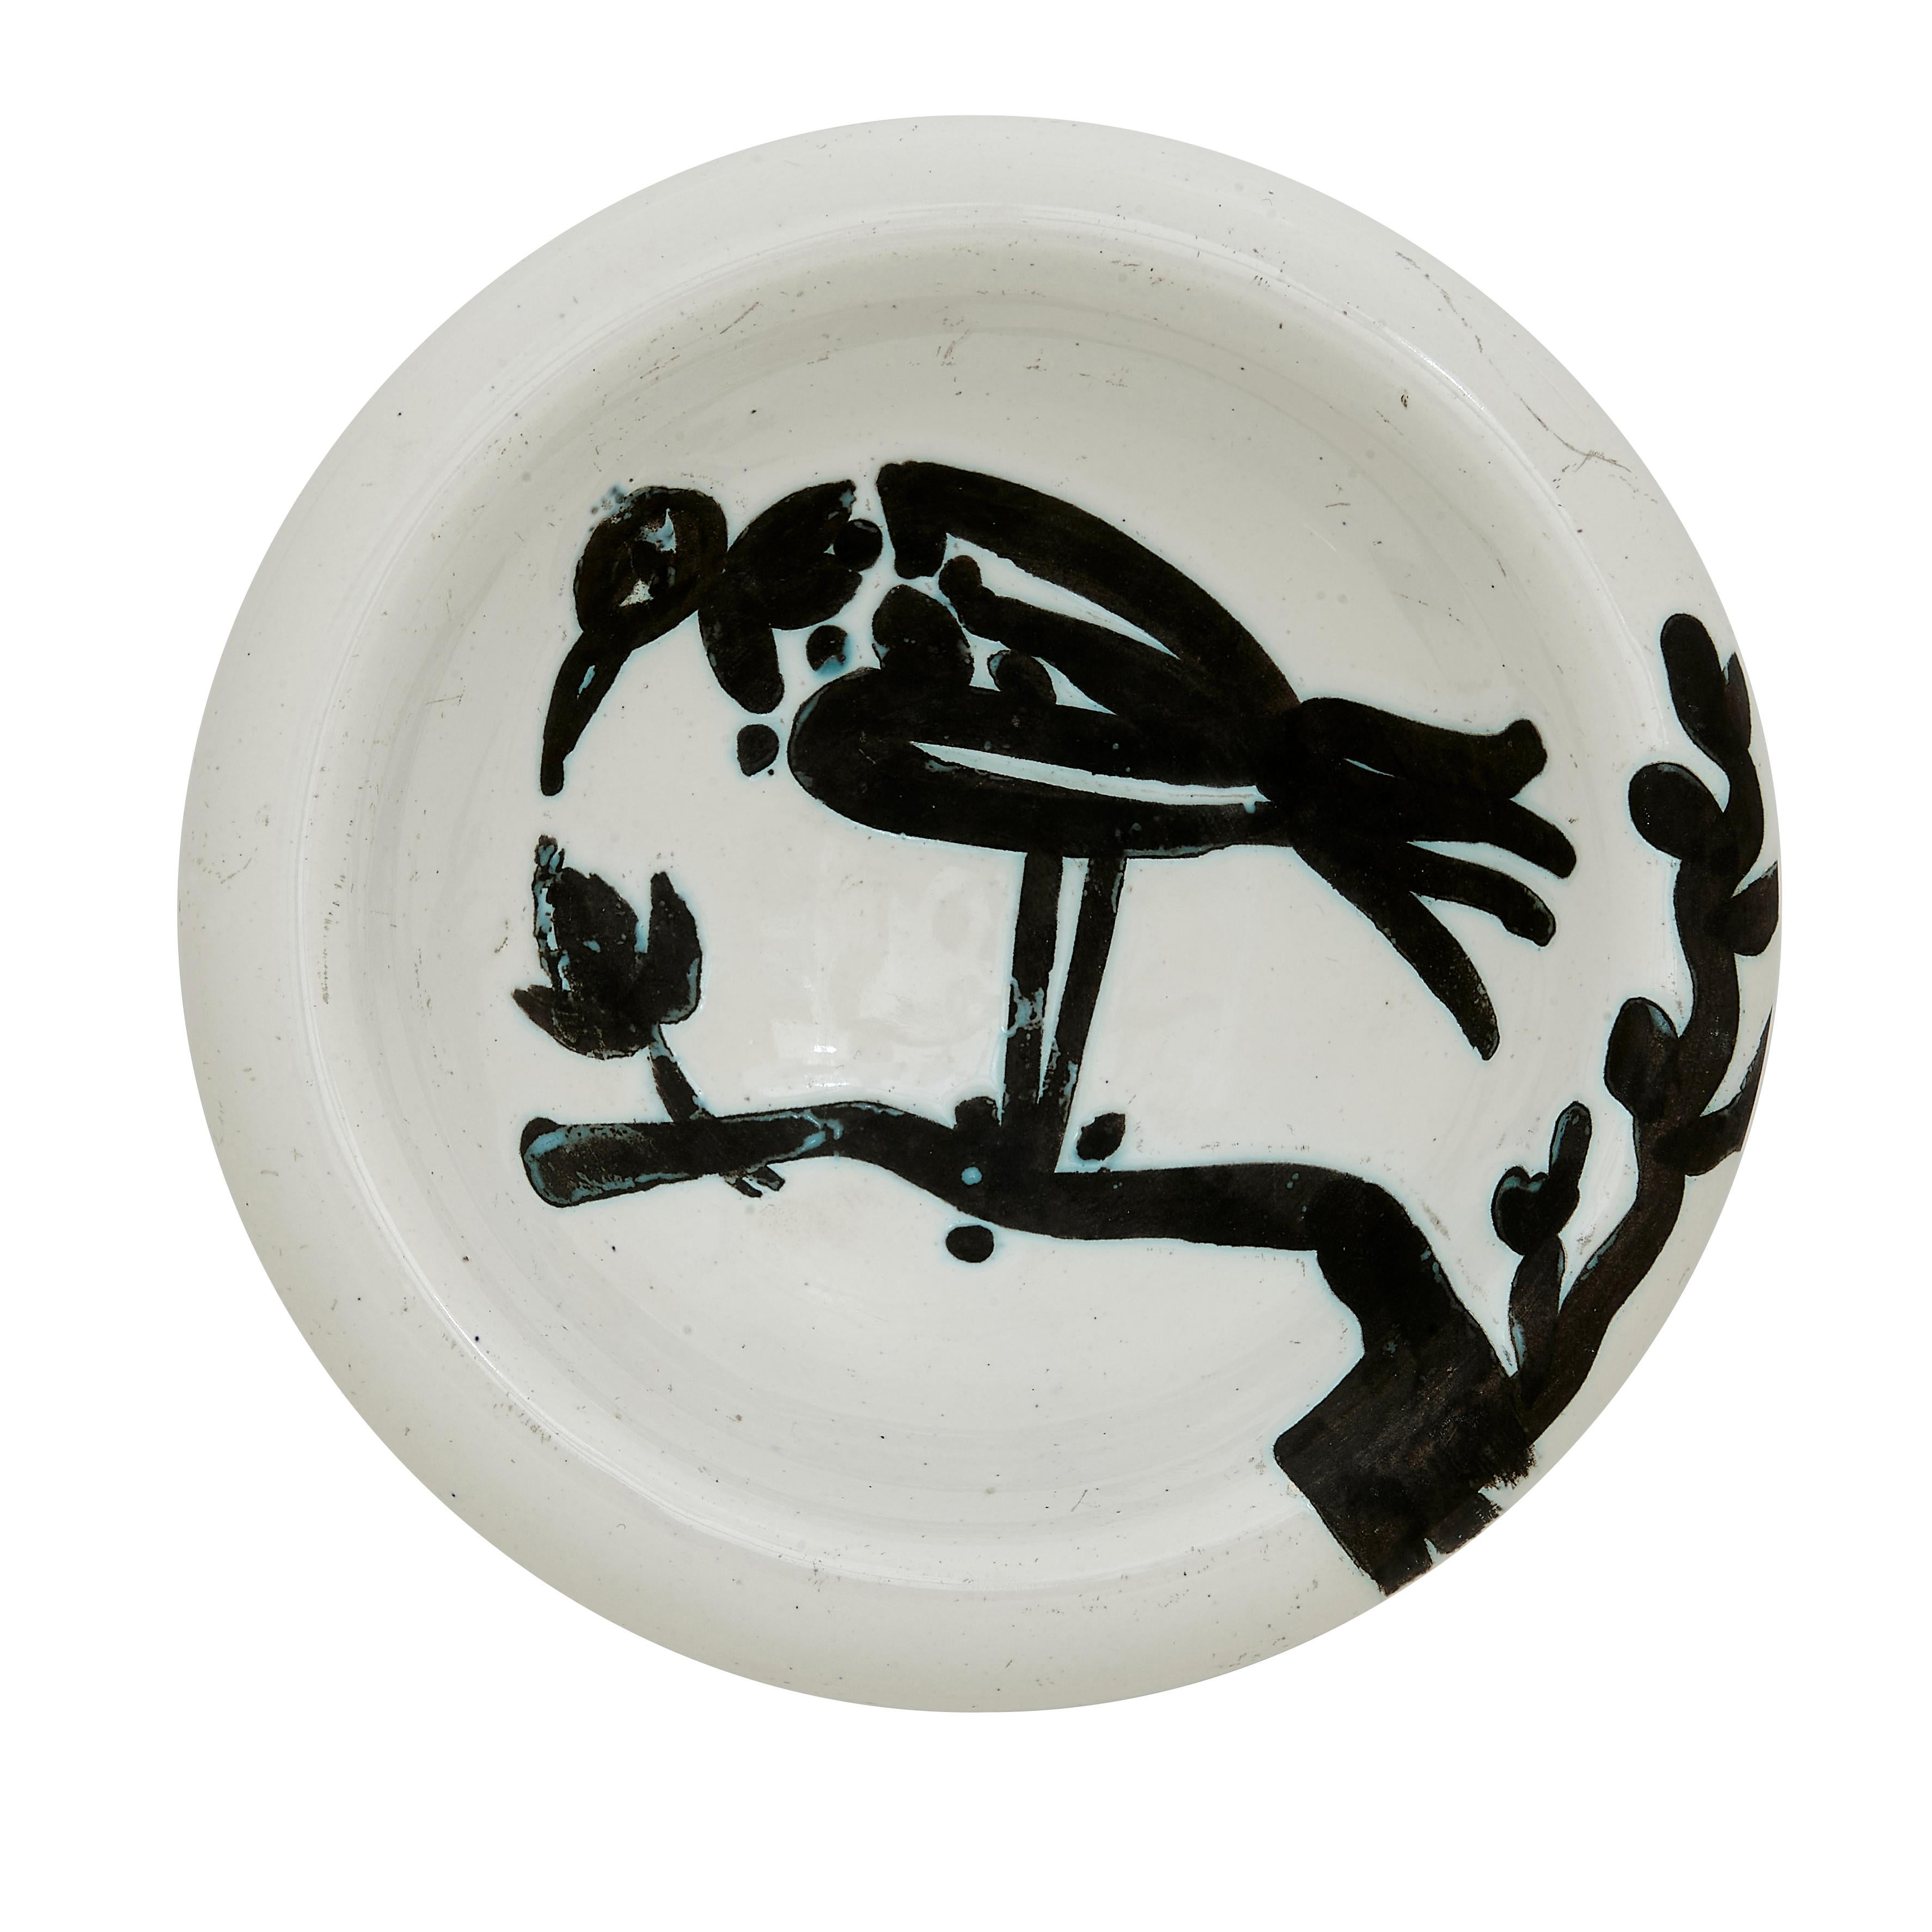 PABLO PICASSO (1881-1973) 
Oiseau sur la branche (A. R. 175) 

Terre de faïence ashtray, painted and partially glazed, 1952, from the edition of 500, inscribed 'Edition Picasso', with the Edition Picasso and Madoura stamps.